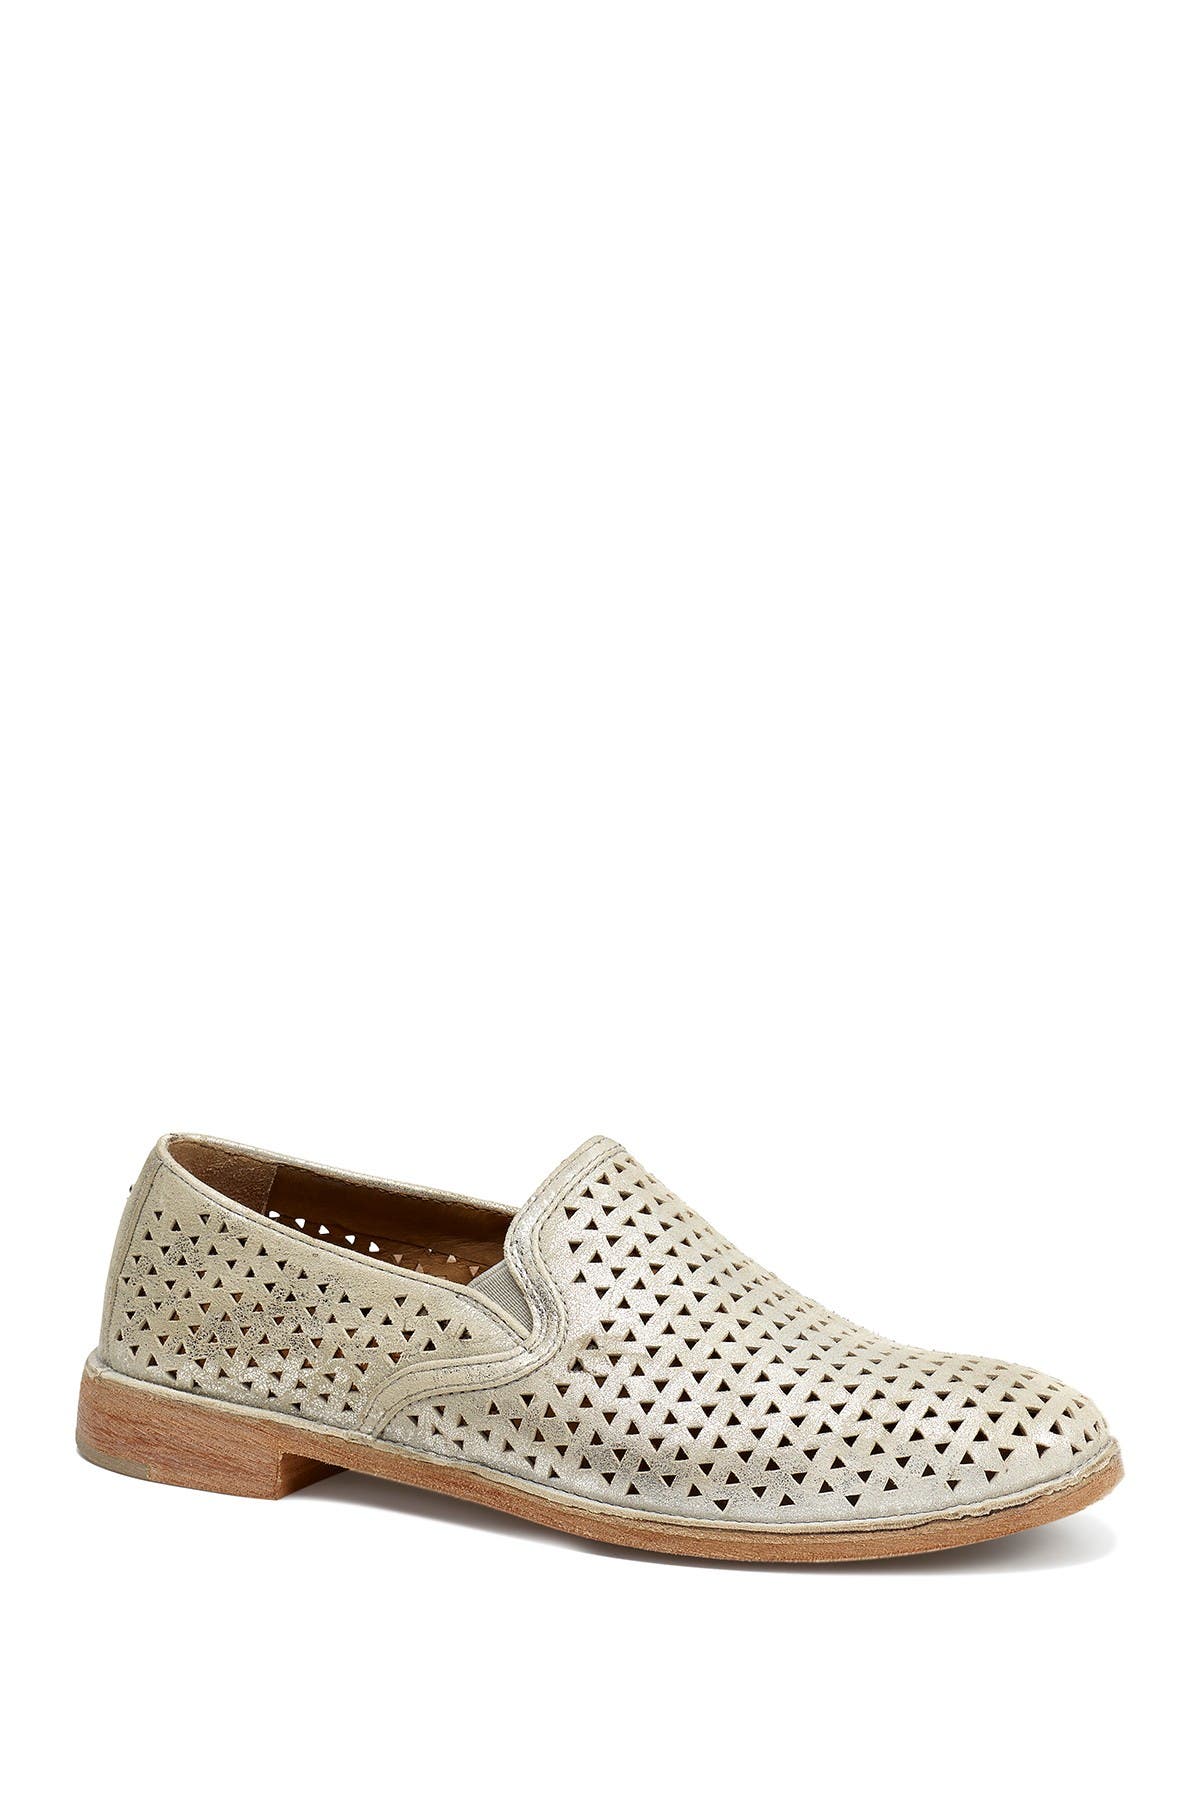 Trask | Ali Perforated Loafer 